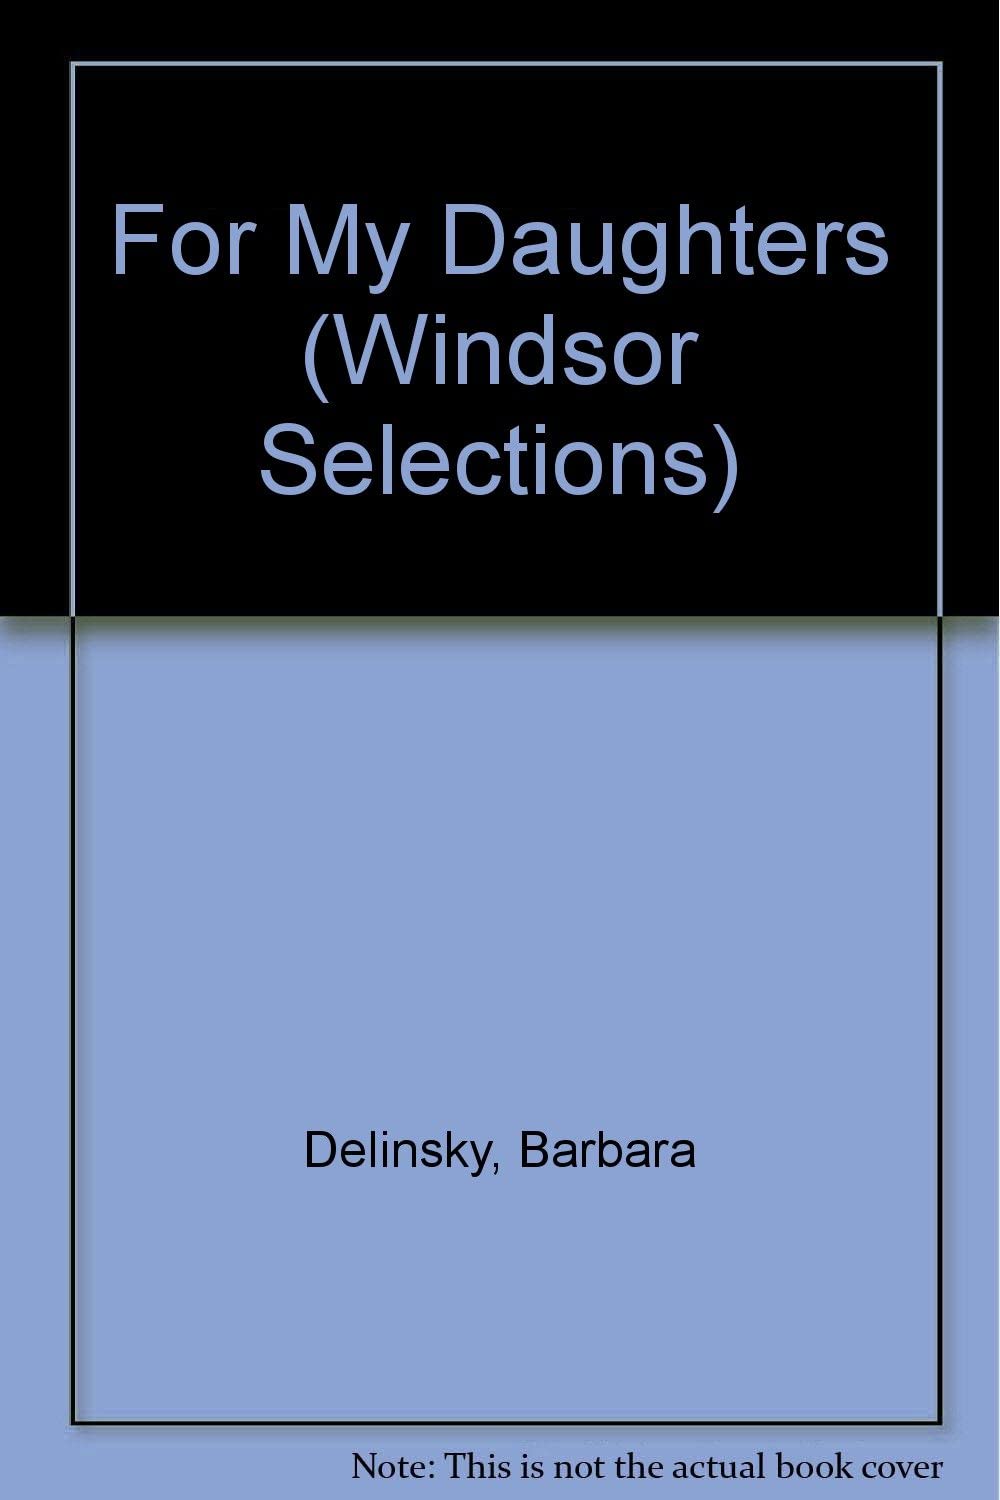 For My Daughters (Windsor Selections)